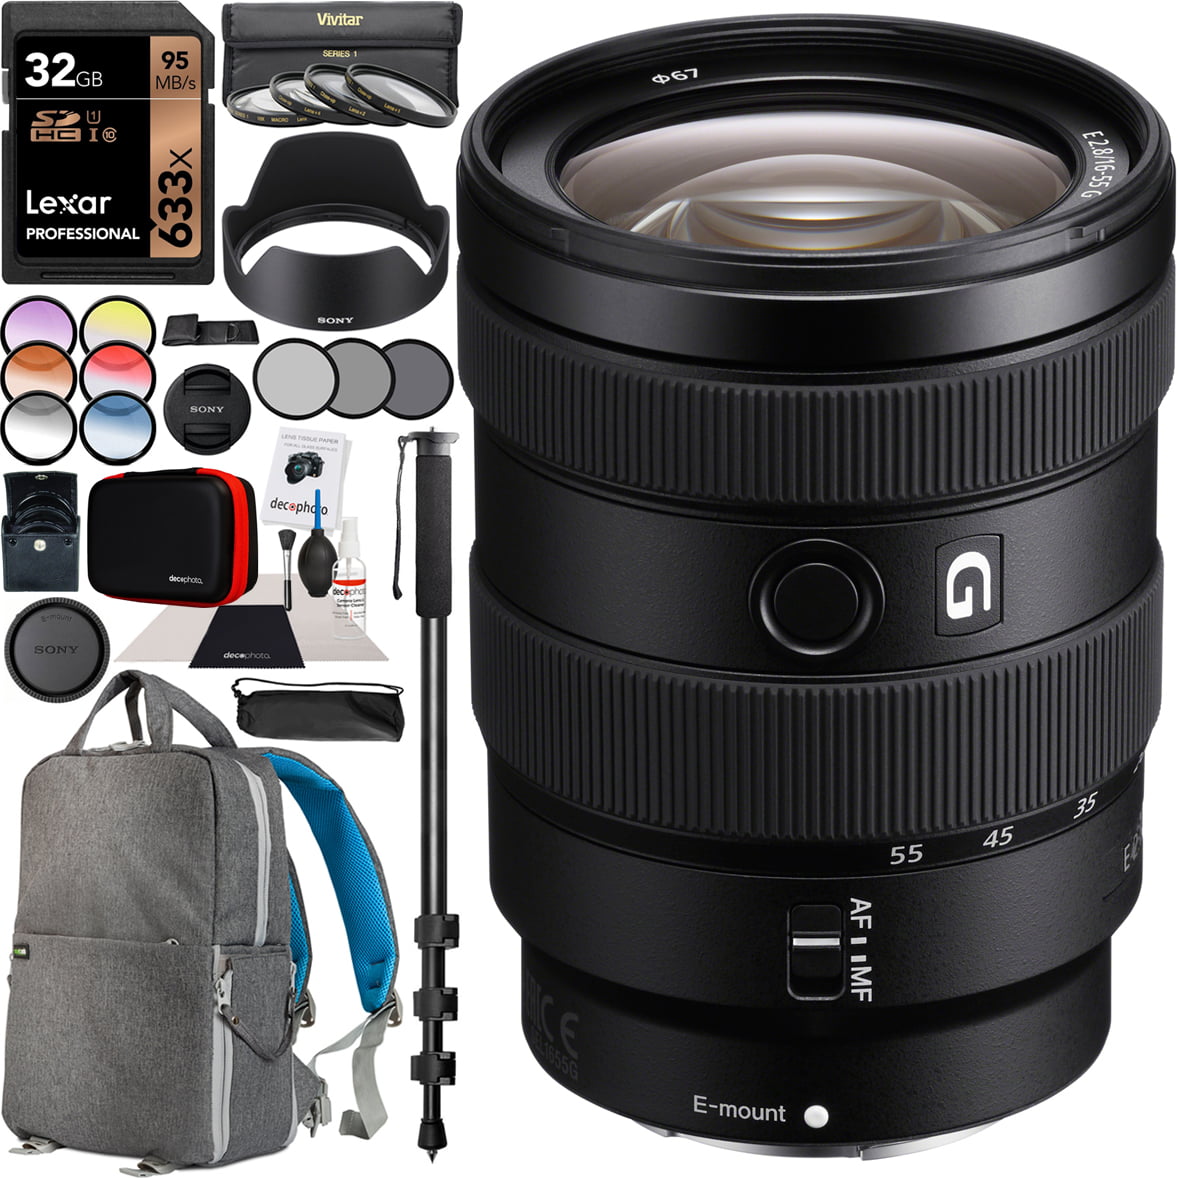 Sony E 16 55mm F2 8 G Lens Sel1655g Standard Zoom For Aps C E Mount Cameras Bundle With 67mm Deluxe Photography Filter Kit Deco Gear Backpack Case And Accessories Walmart Com Walmart Com